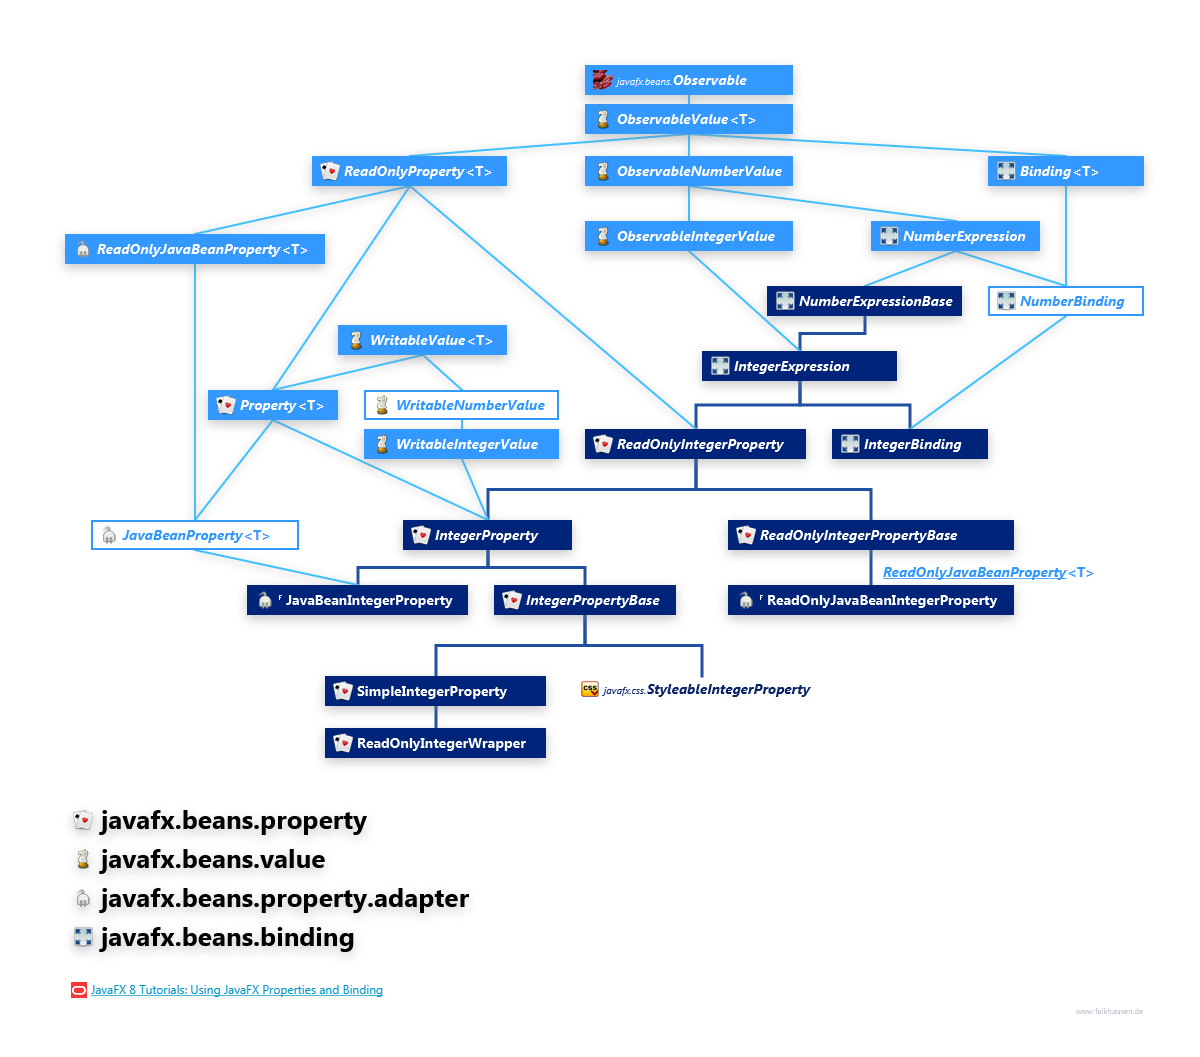 javafx.beans.property javafx.beans.value javafx.beans.property.adapter javafx.beans.binding IntegerProperty Hierarchy class diagram and api documentation for JavaFX 10